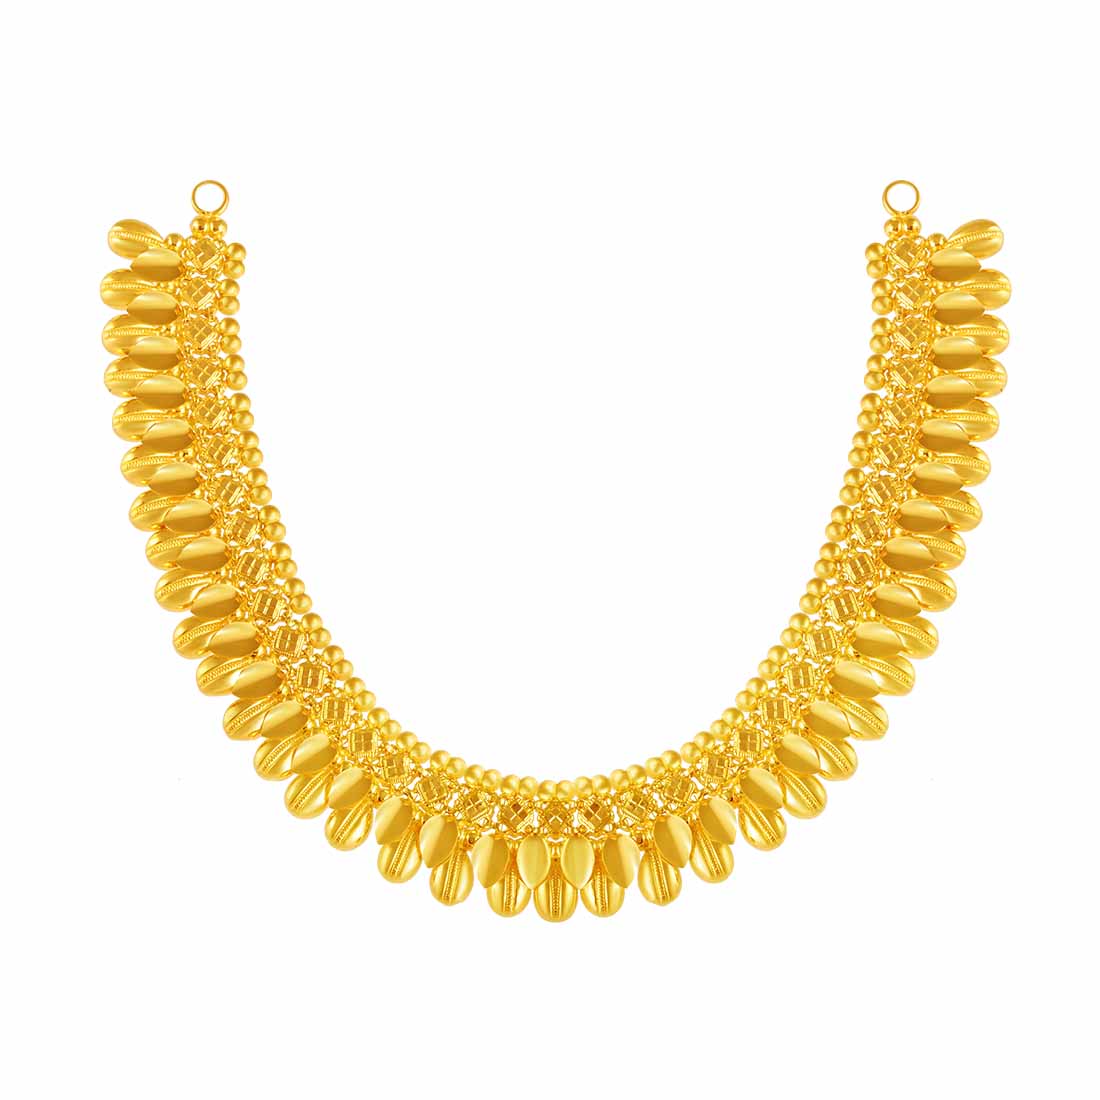 Multi Strand 22K Gold Necklace - Add Flair To Your Ensemble | Virani  Jewelers